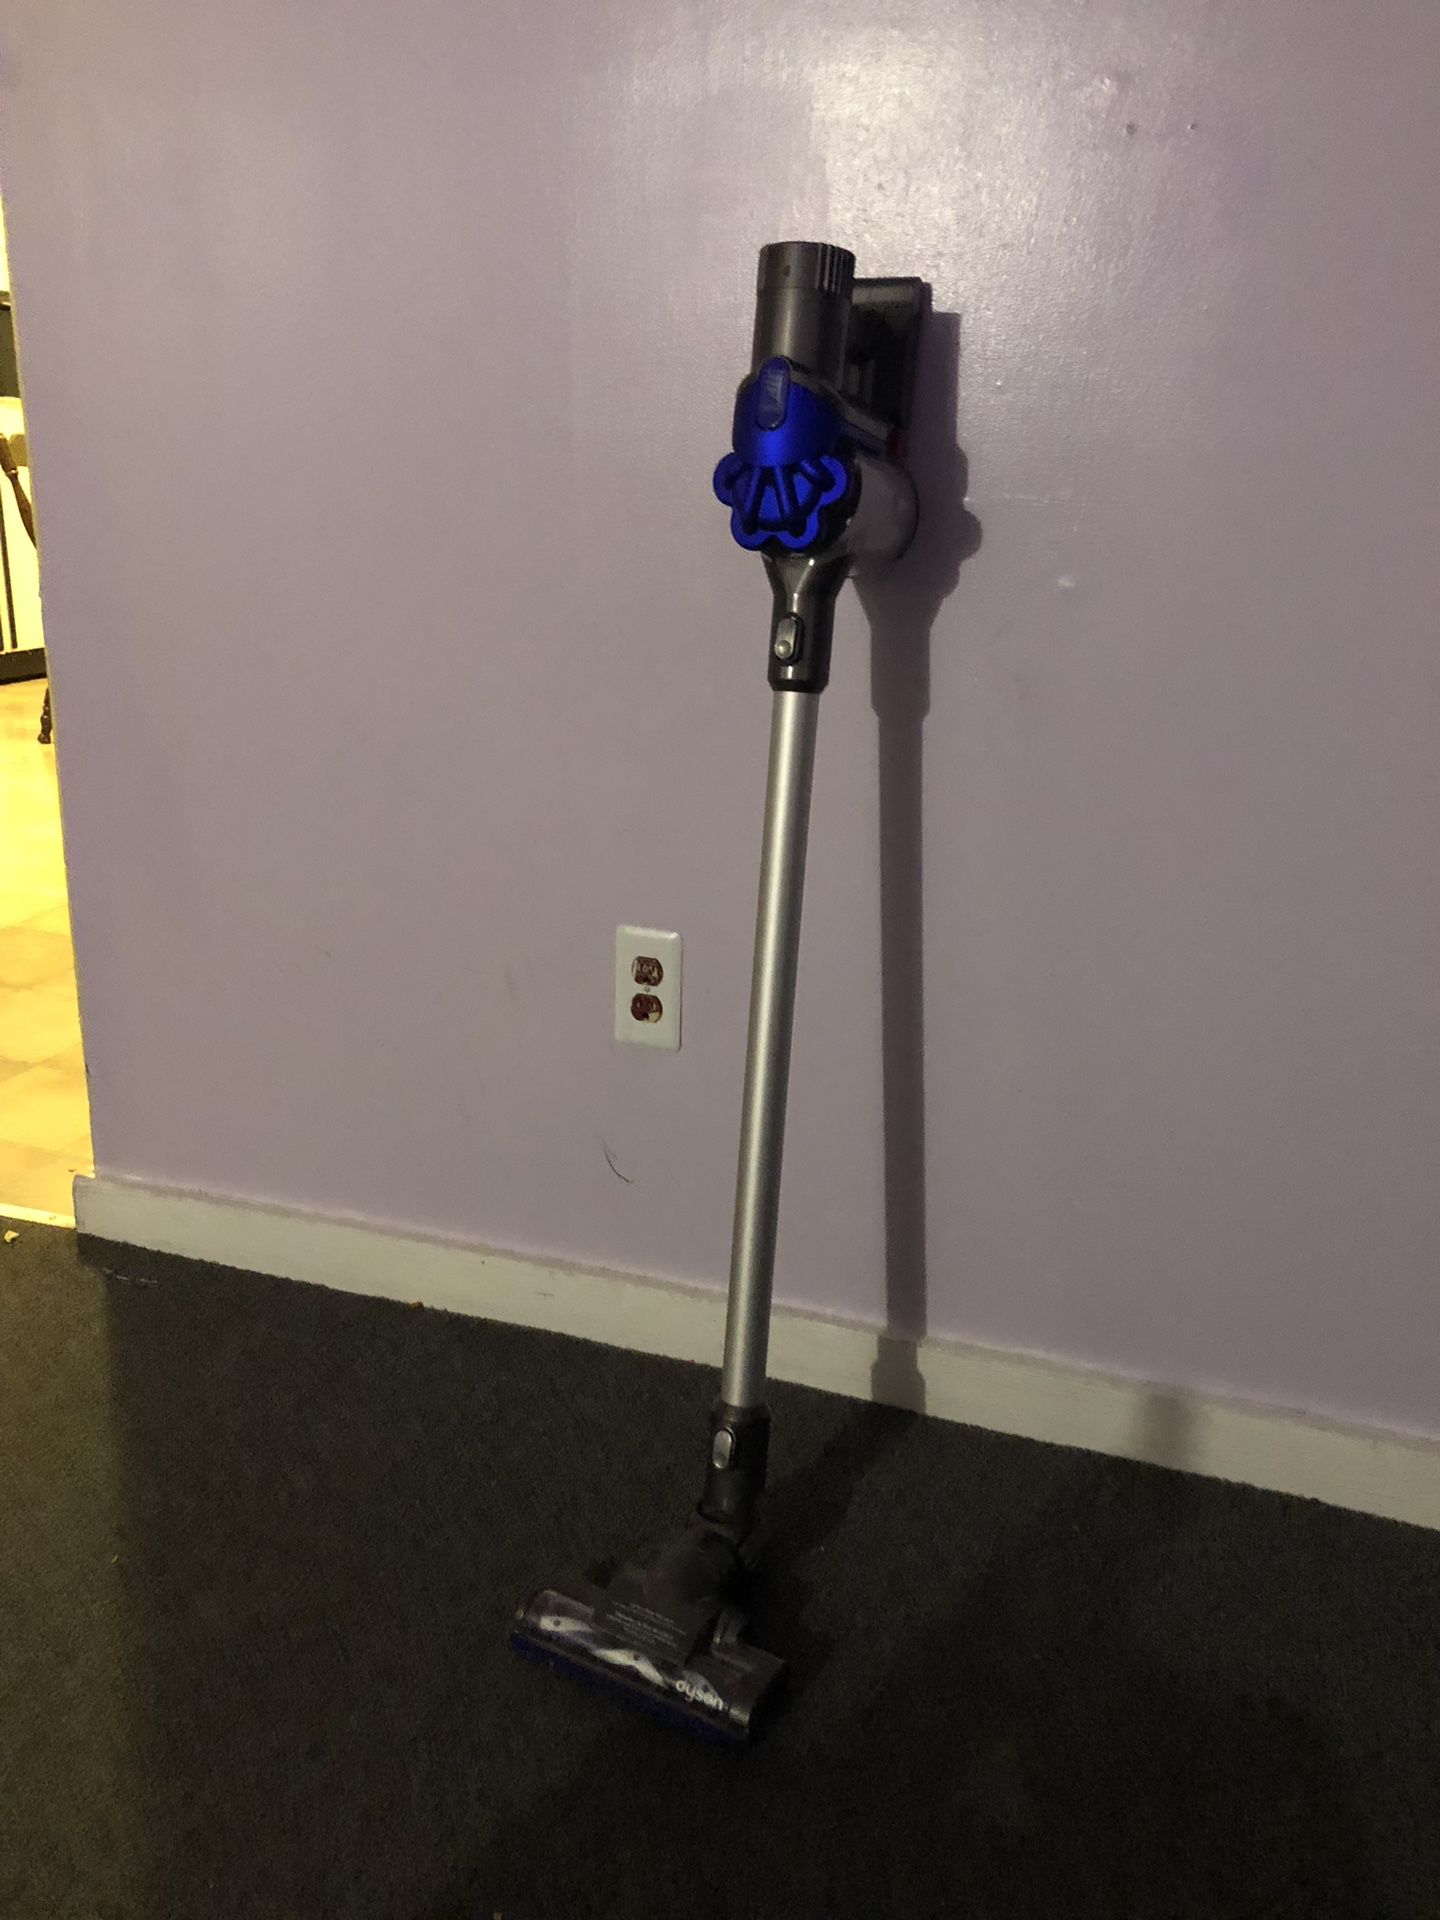 Dyson vacuum mint condition works great 60